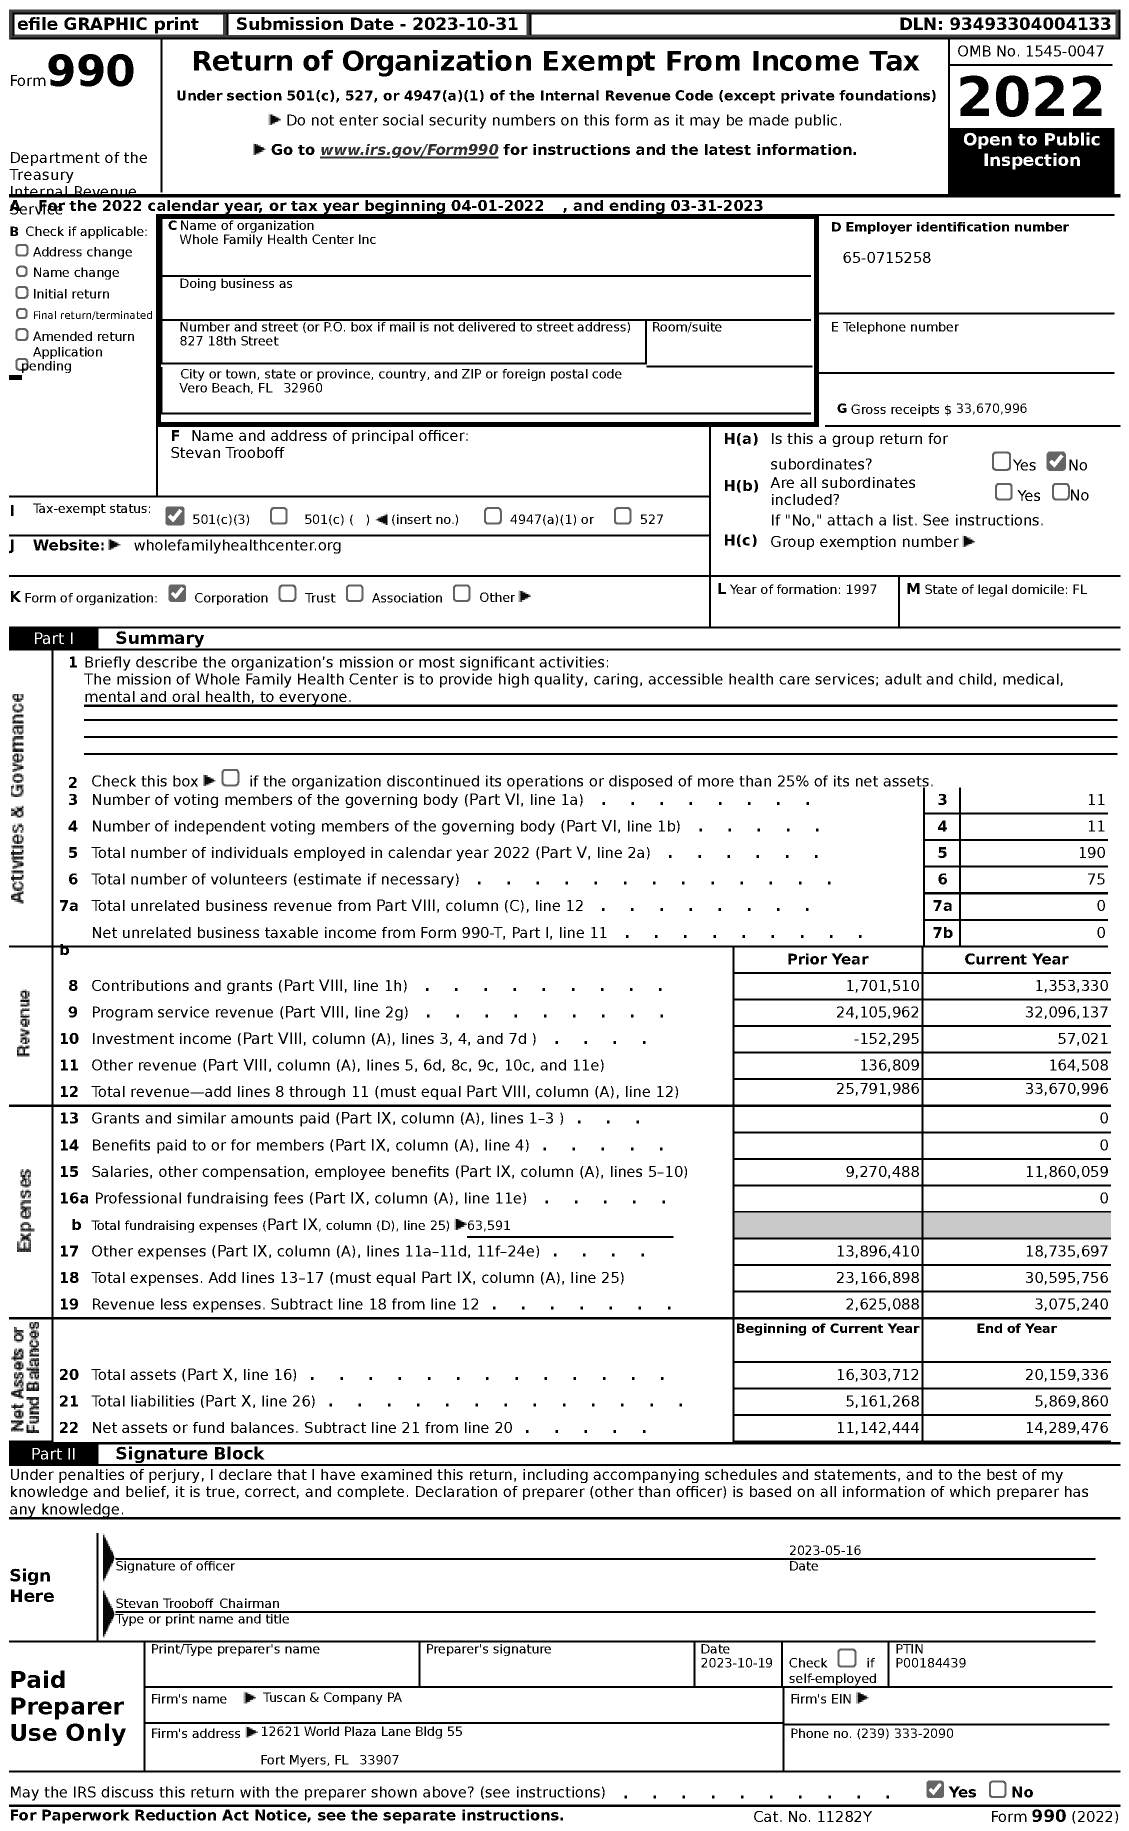 Image of first page of 2022 Form 990 for Whole Family Health Center (WFHC)